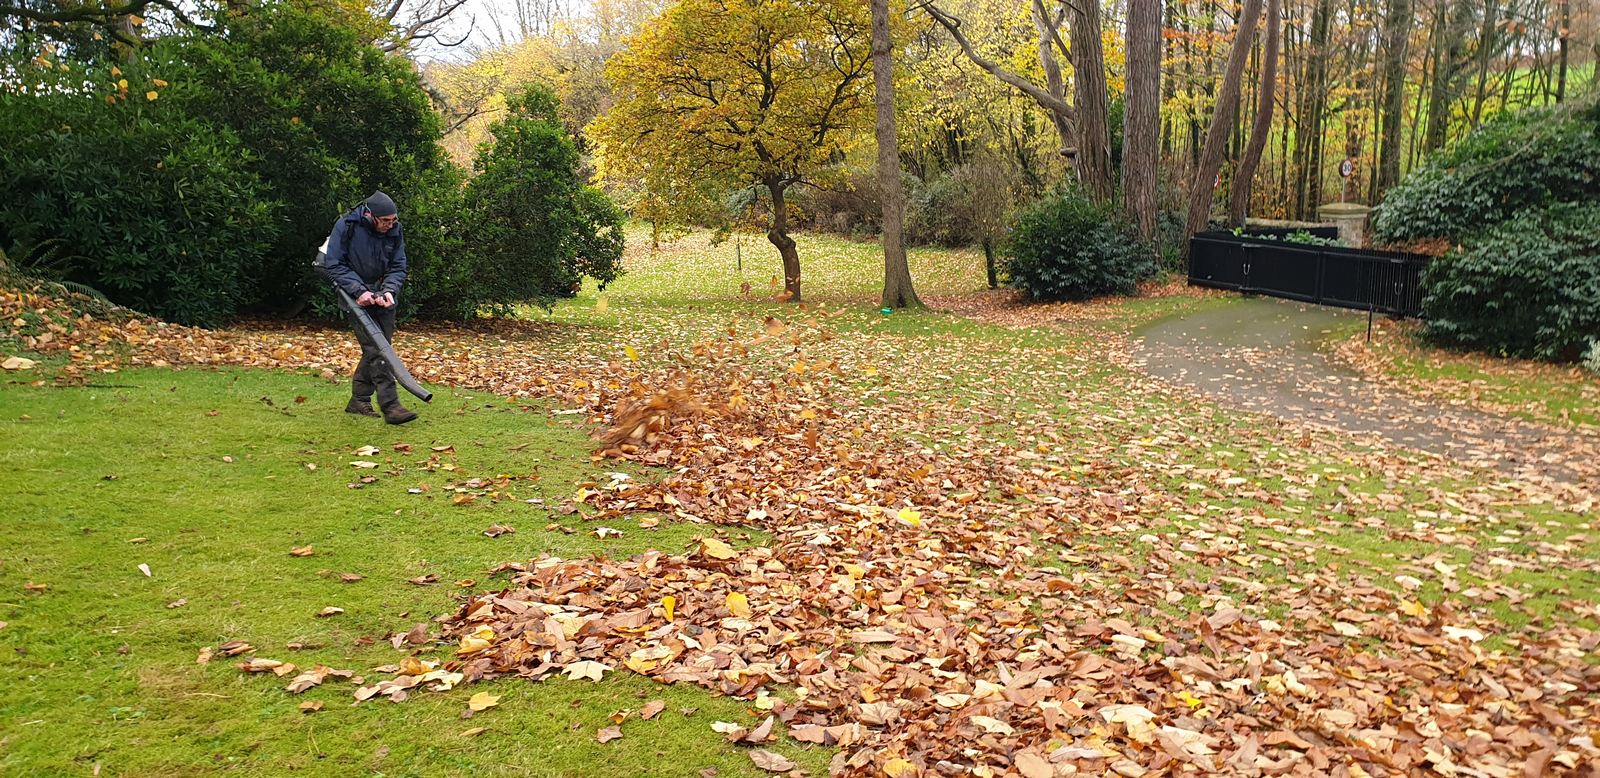 Clearing leaves in a landscaped park in Monmouthshire